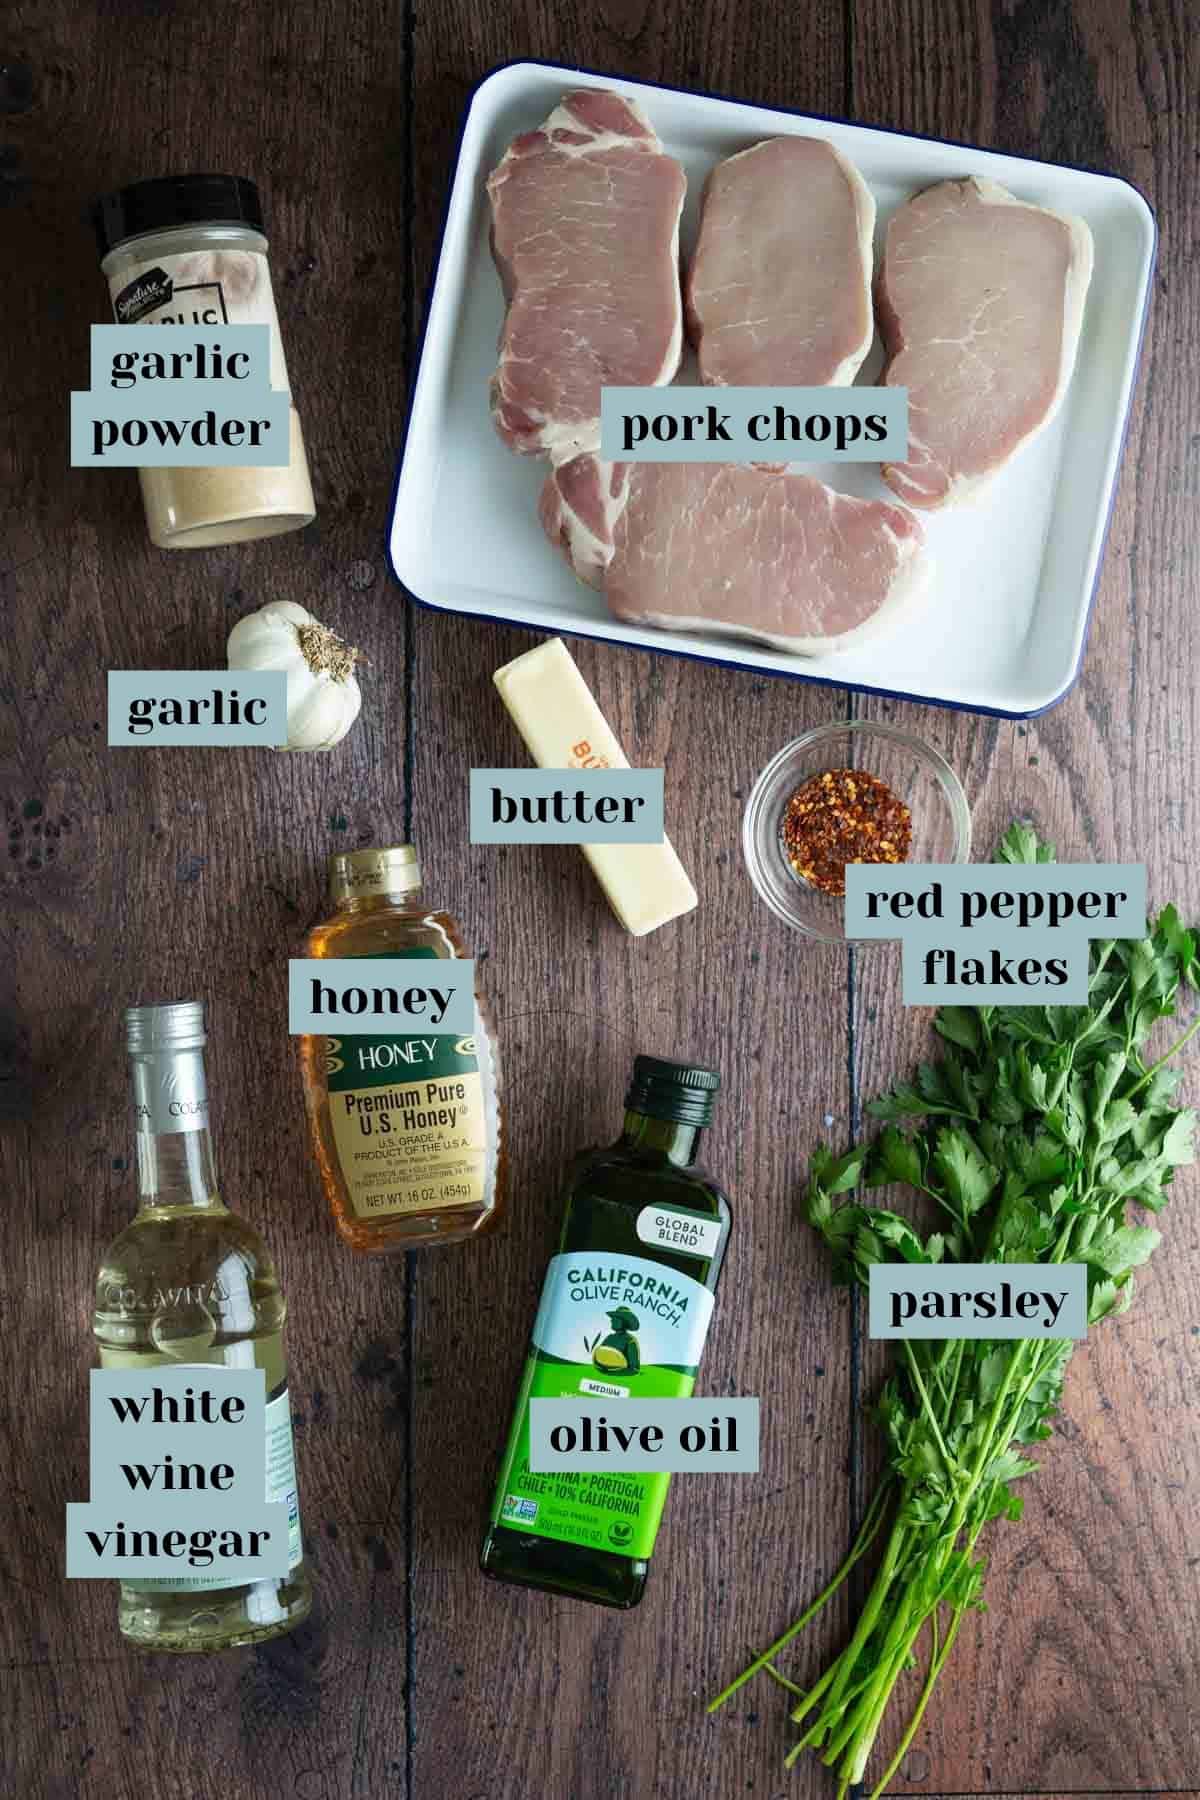 Ingredients for cooking pork chops arranged on a wooden surface, including pork chops, garlic, olive oil, honey, and spices..